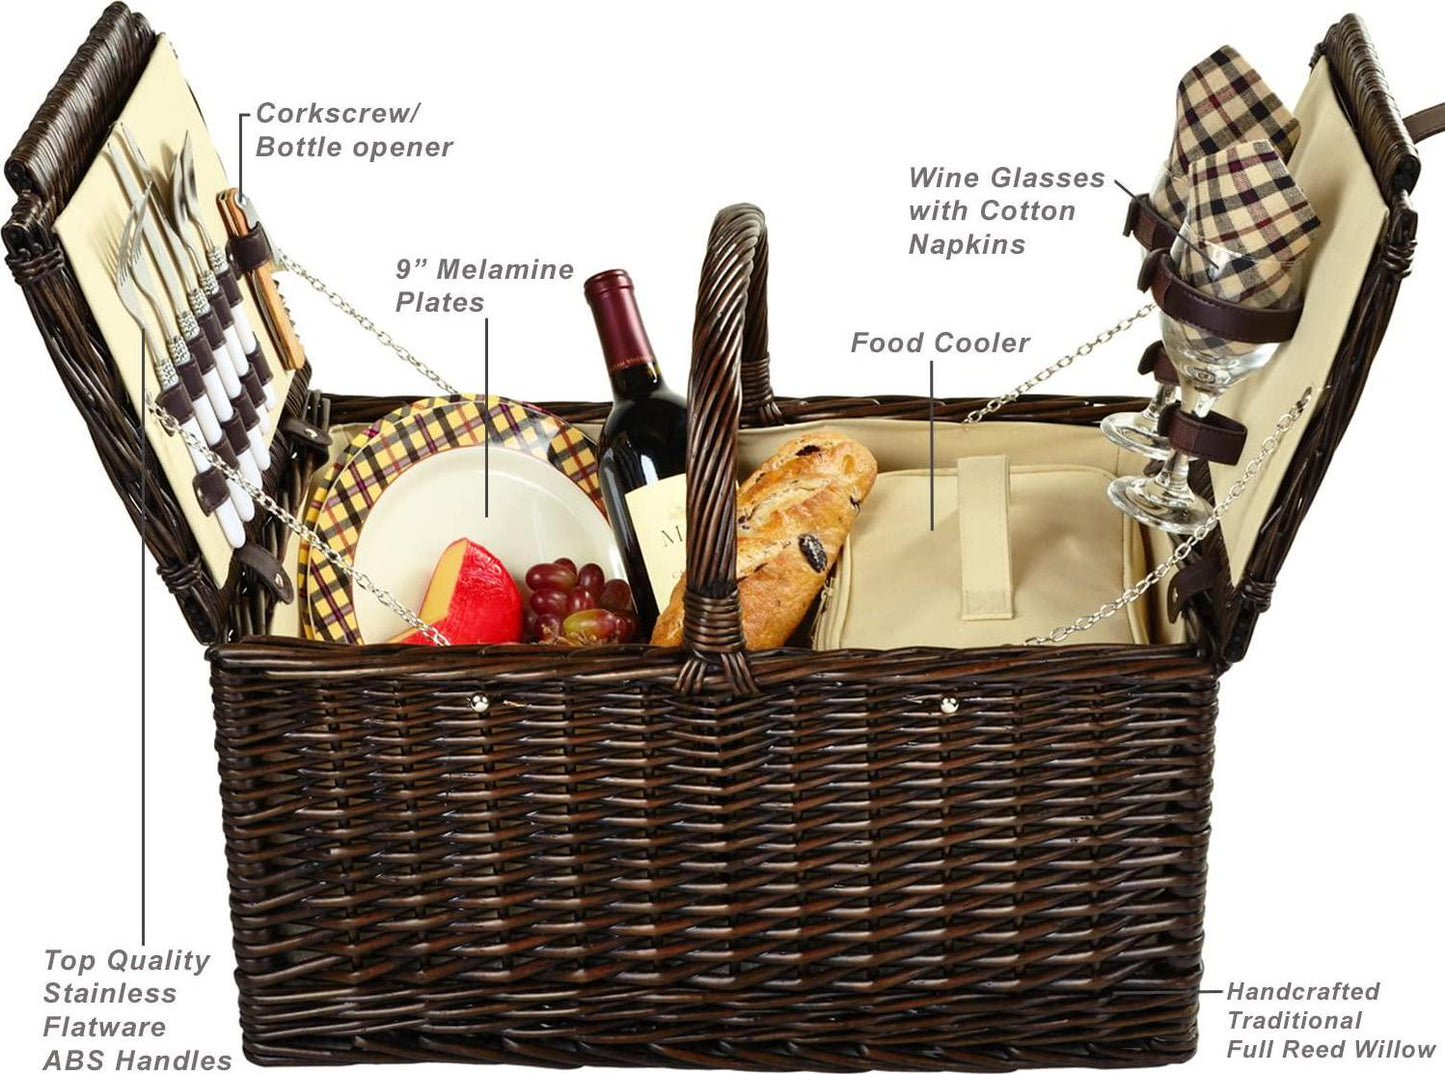 Picnic at Ascot Surrey Willow Picnic Basket with Service for 2 - London Plaid